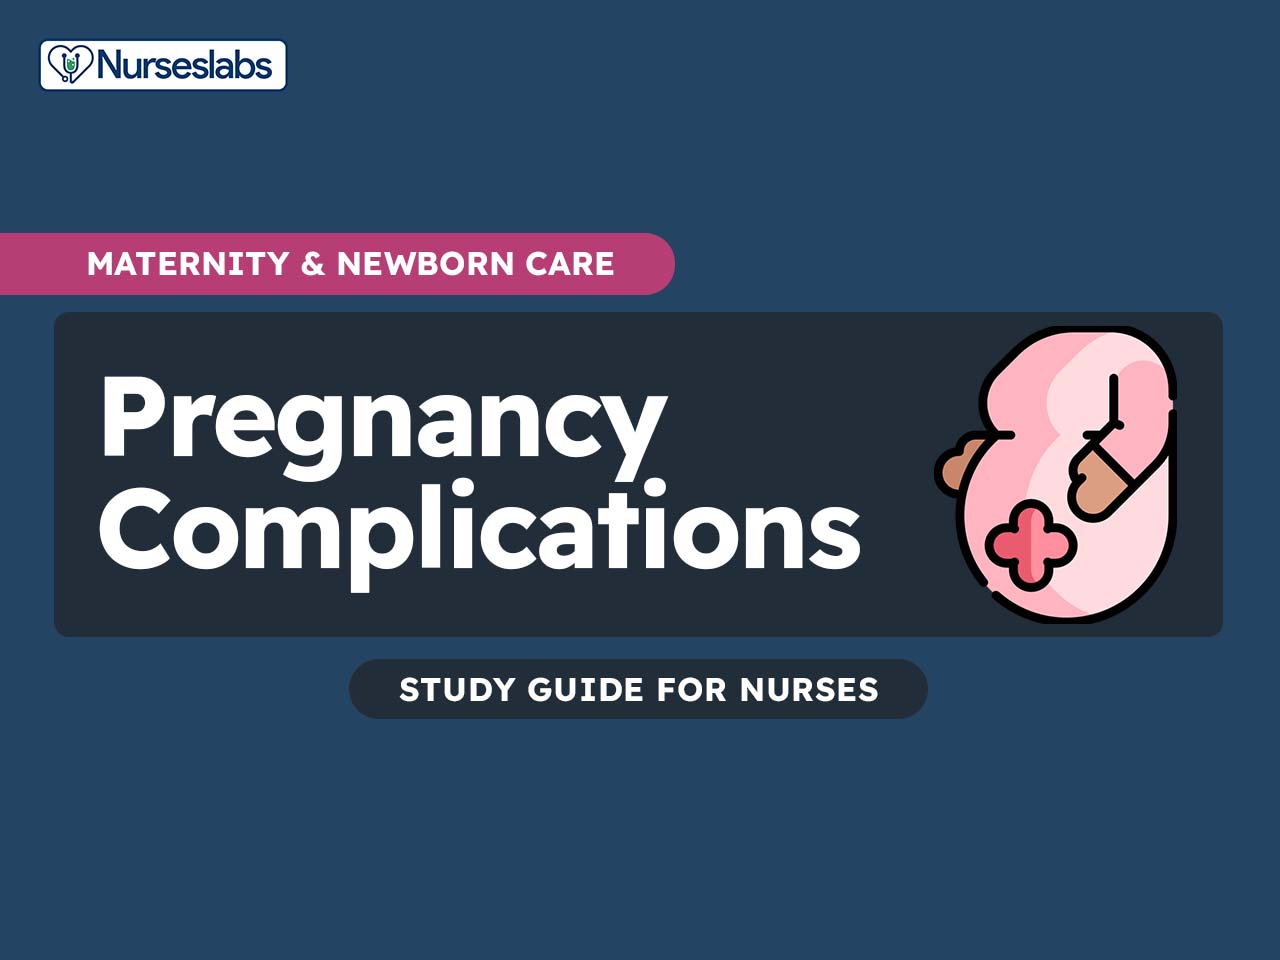 Study Guides for Maternity and Newborn Nursing Care - Nurseslabs